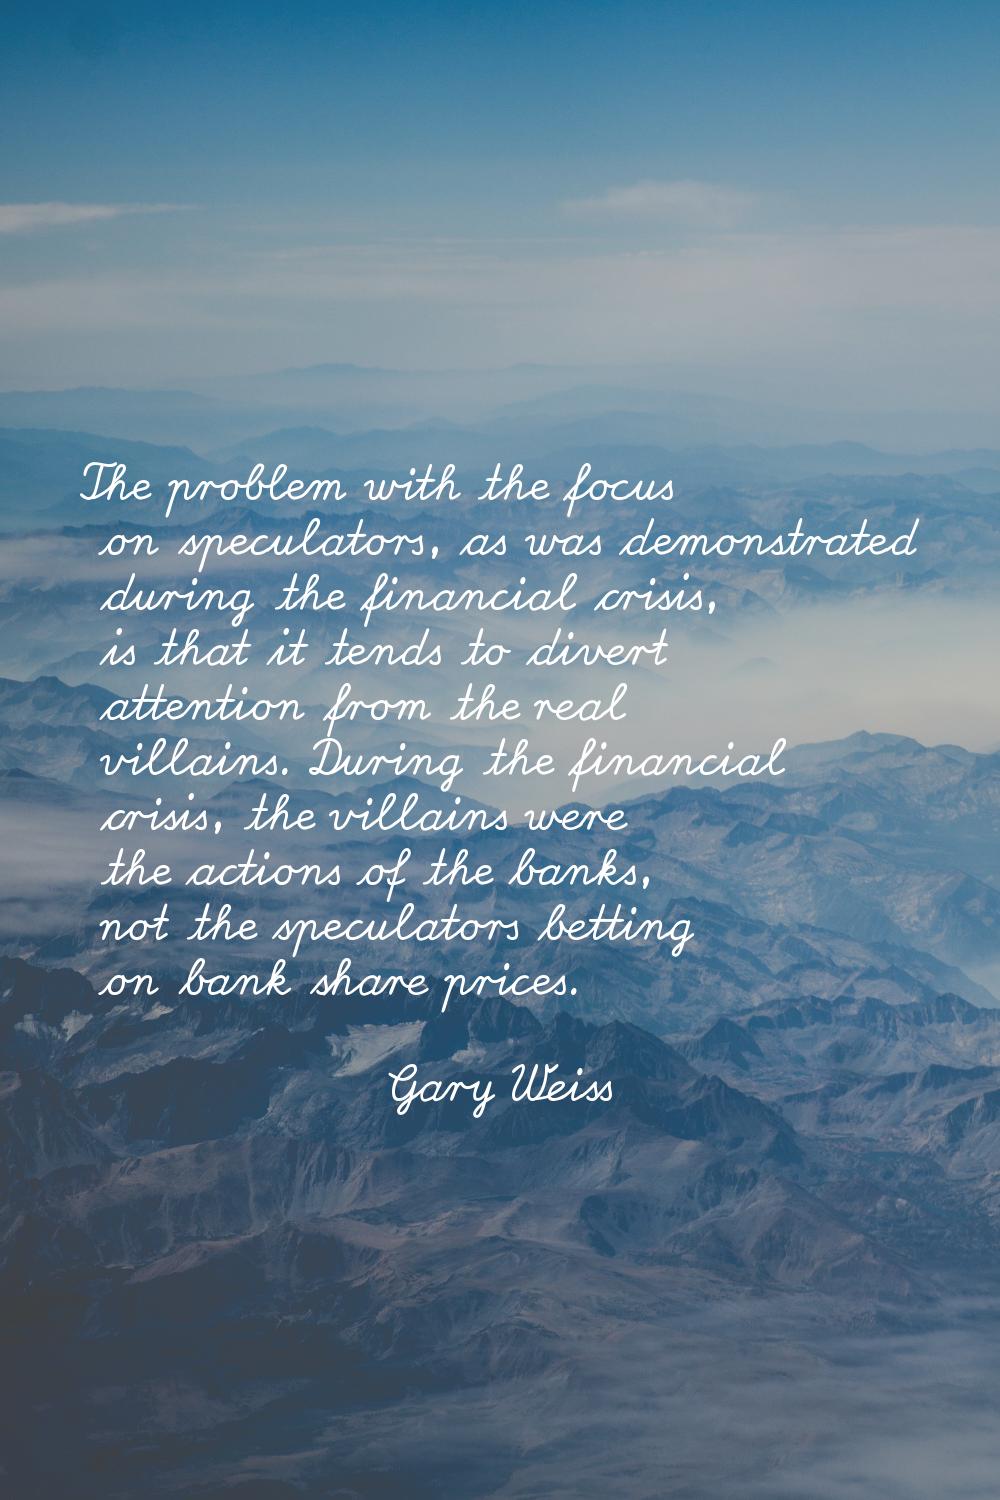 The problem with the focus on speculators, as was demonstrated during the financial crisis, is that